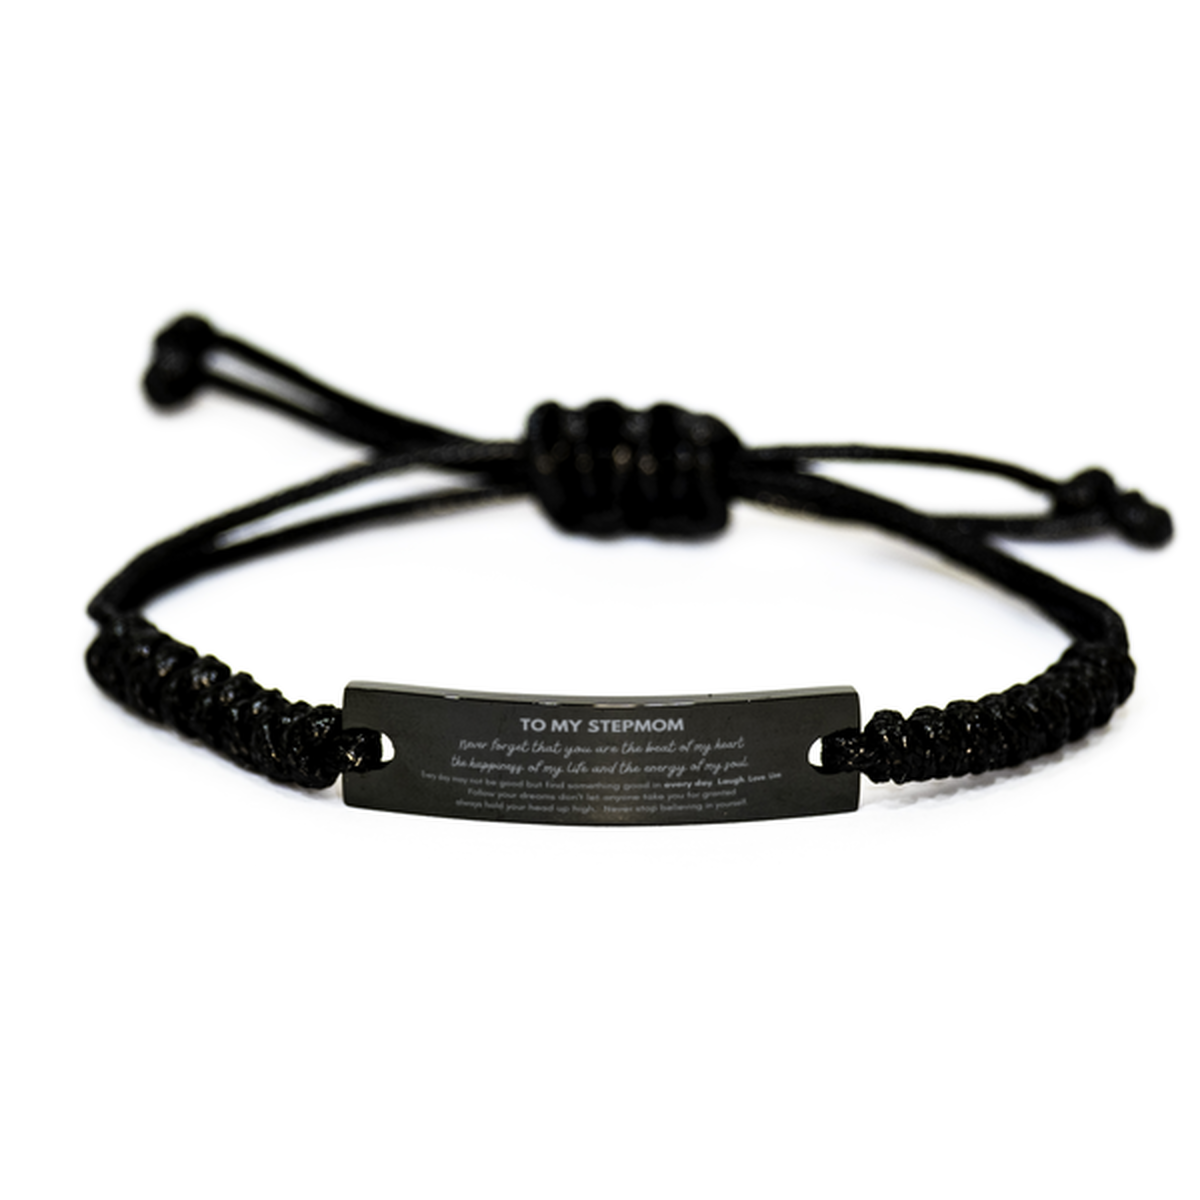 To My Stepmom Bracelet Gifts, Christmas Stepmom Black Rope Bracelet Present, Birthday Unique Motivational For Stepmom, To My Stepmom Never forget that you are the beat of my heart the happiness of my life and the energy of my soul